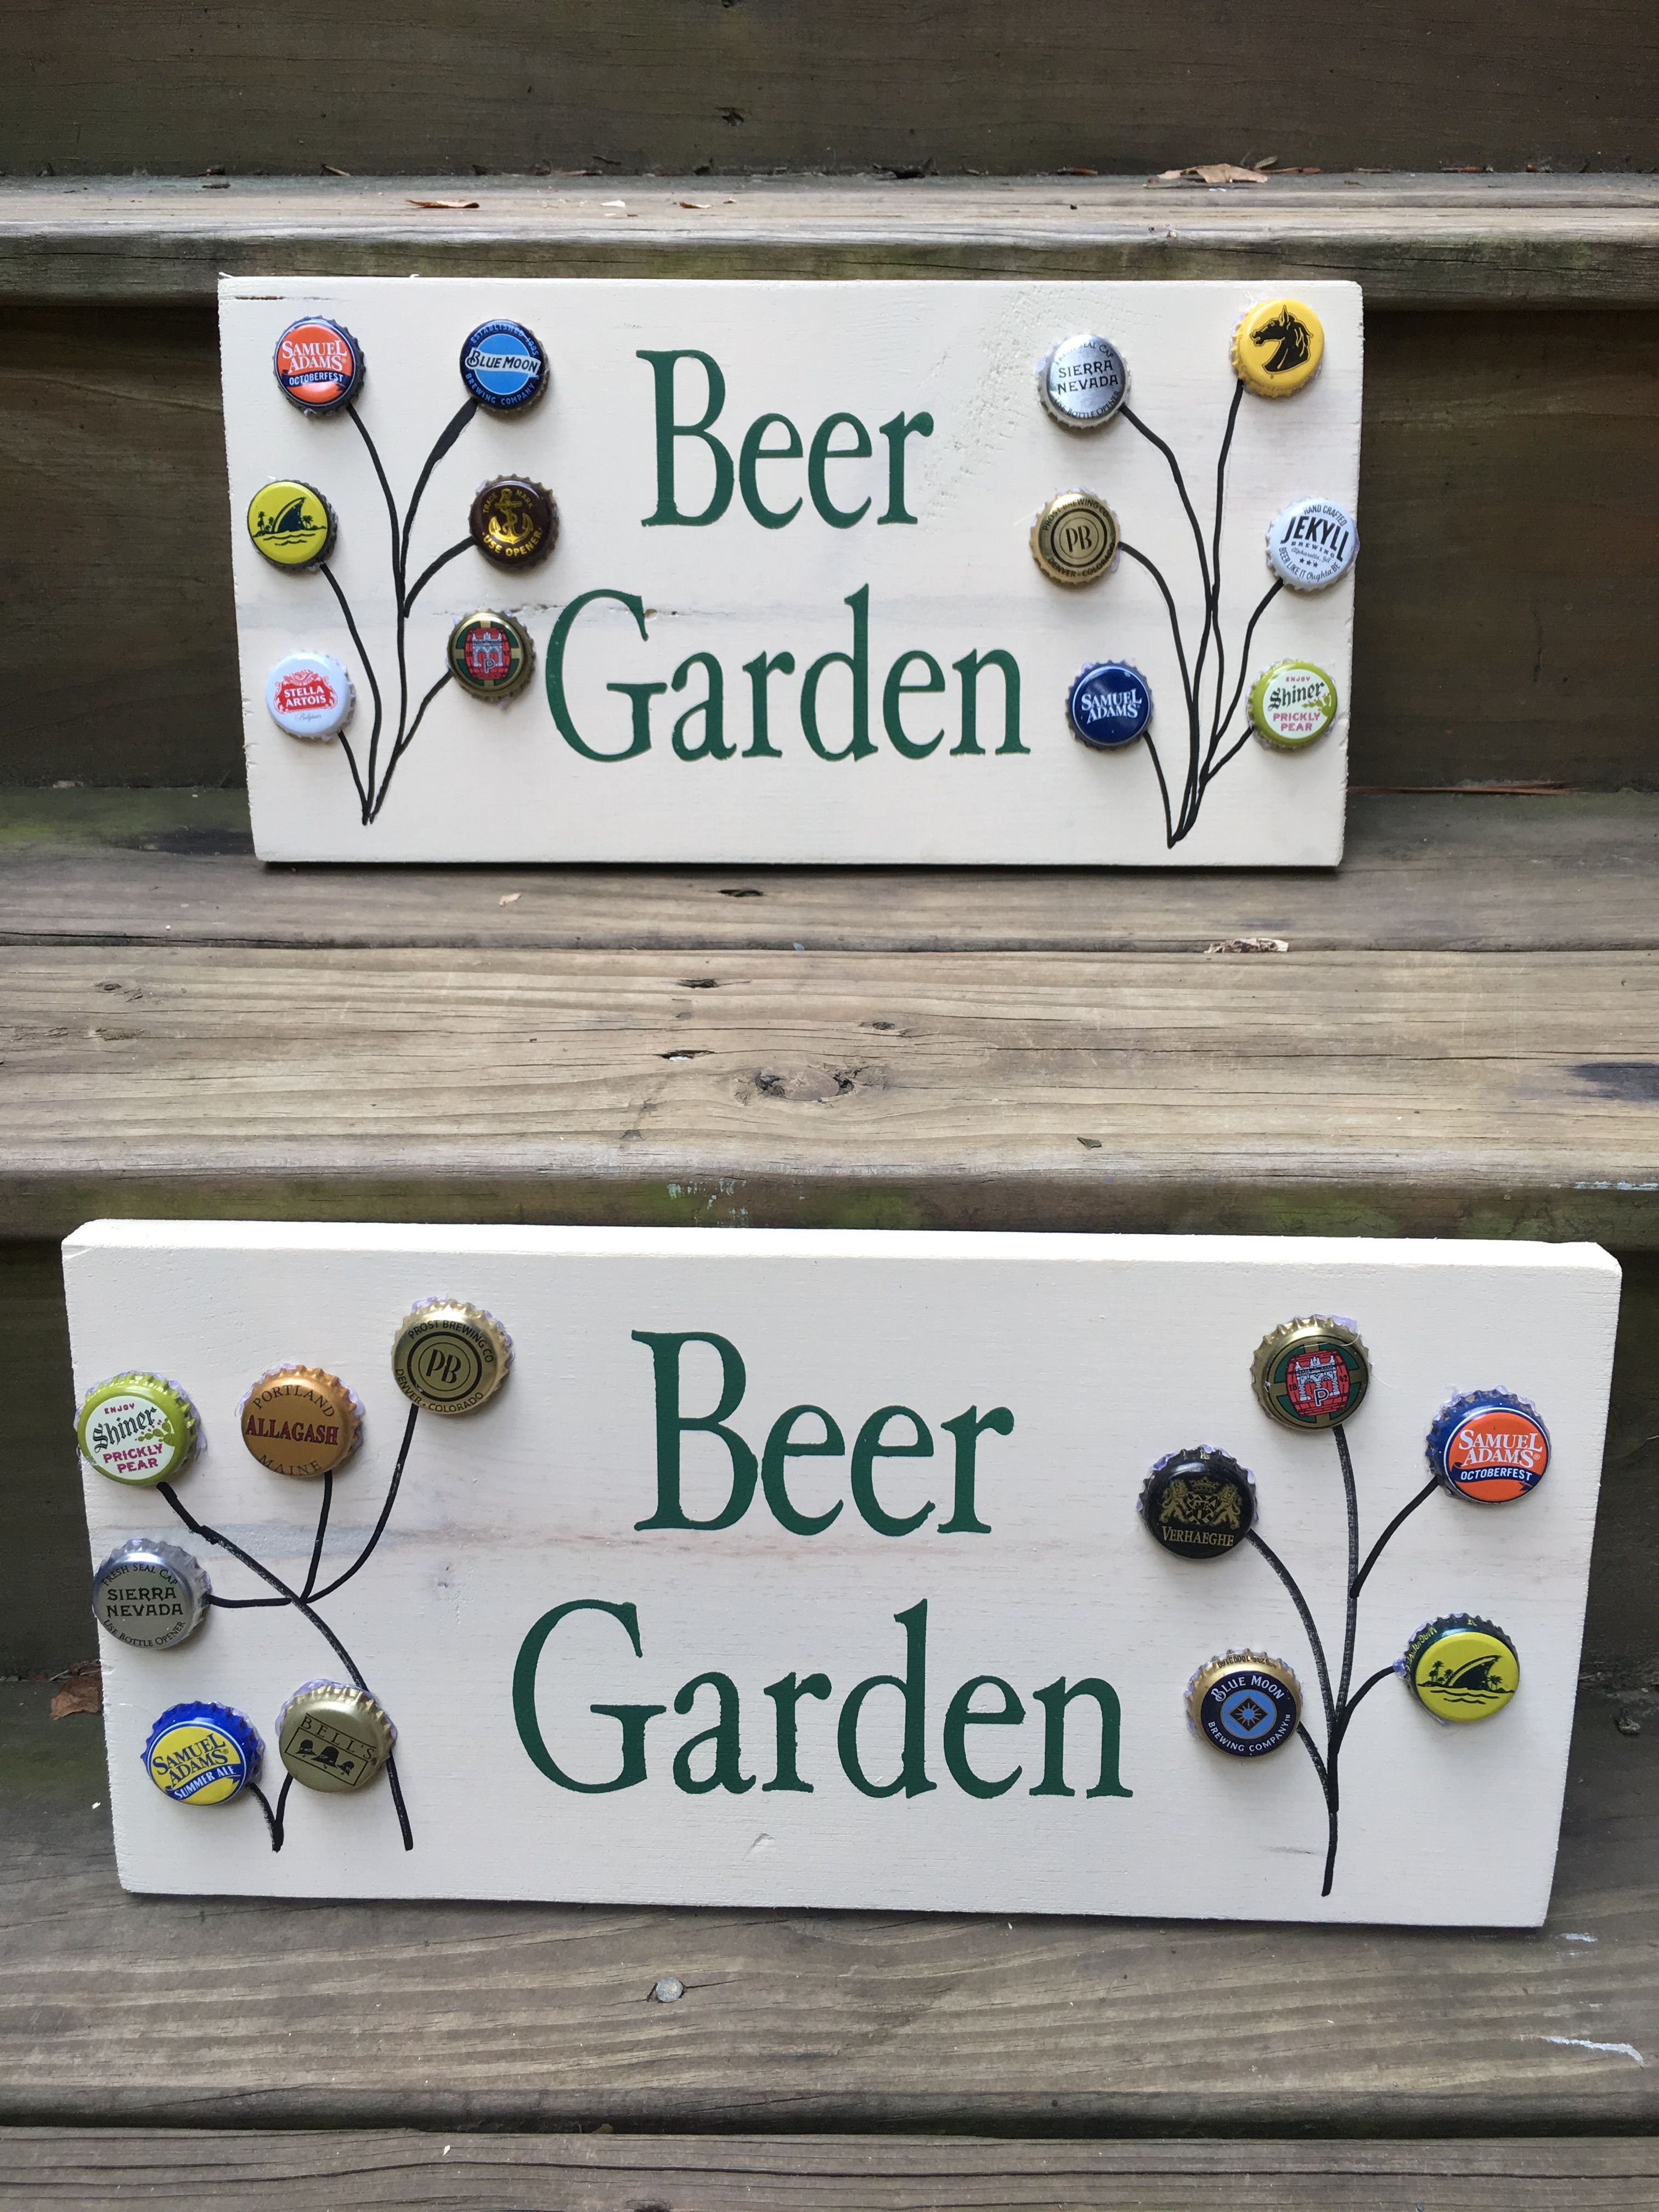 Pallet sign beer caps art paint the caps instead an write familys name ..garden or something instead of beer